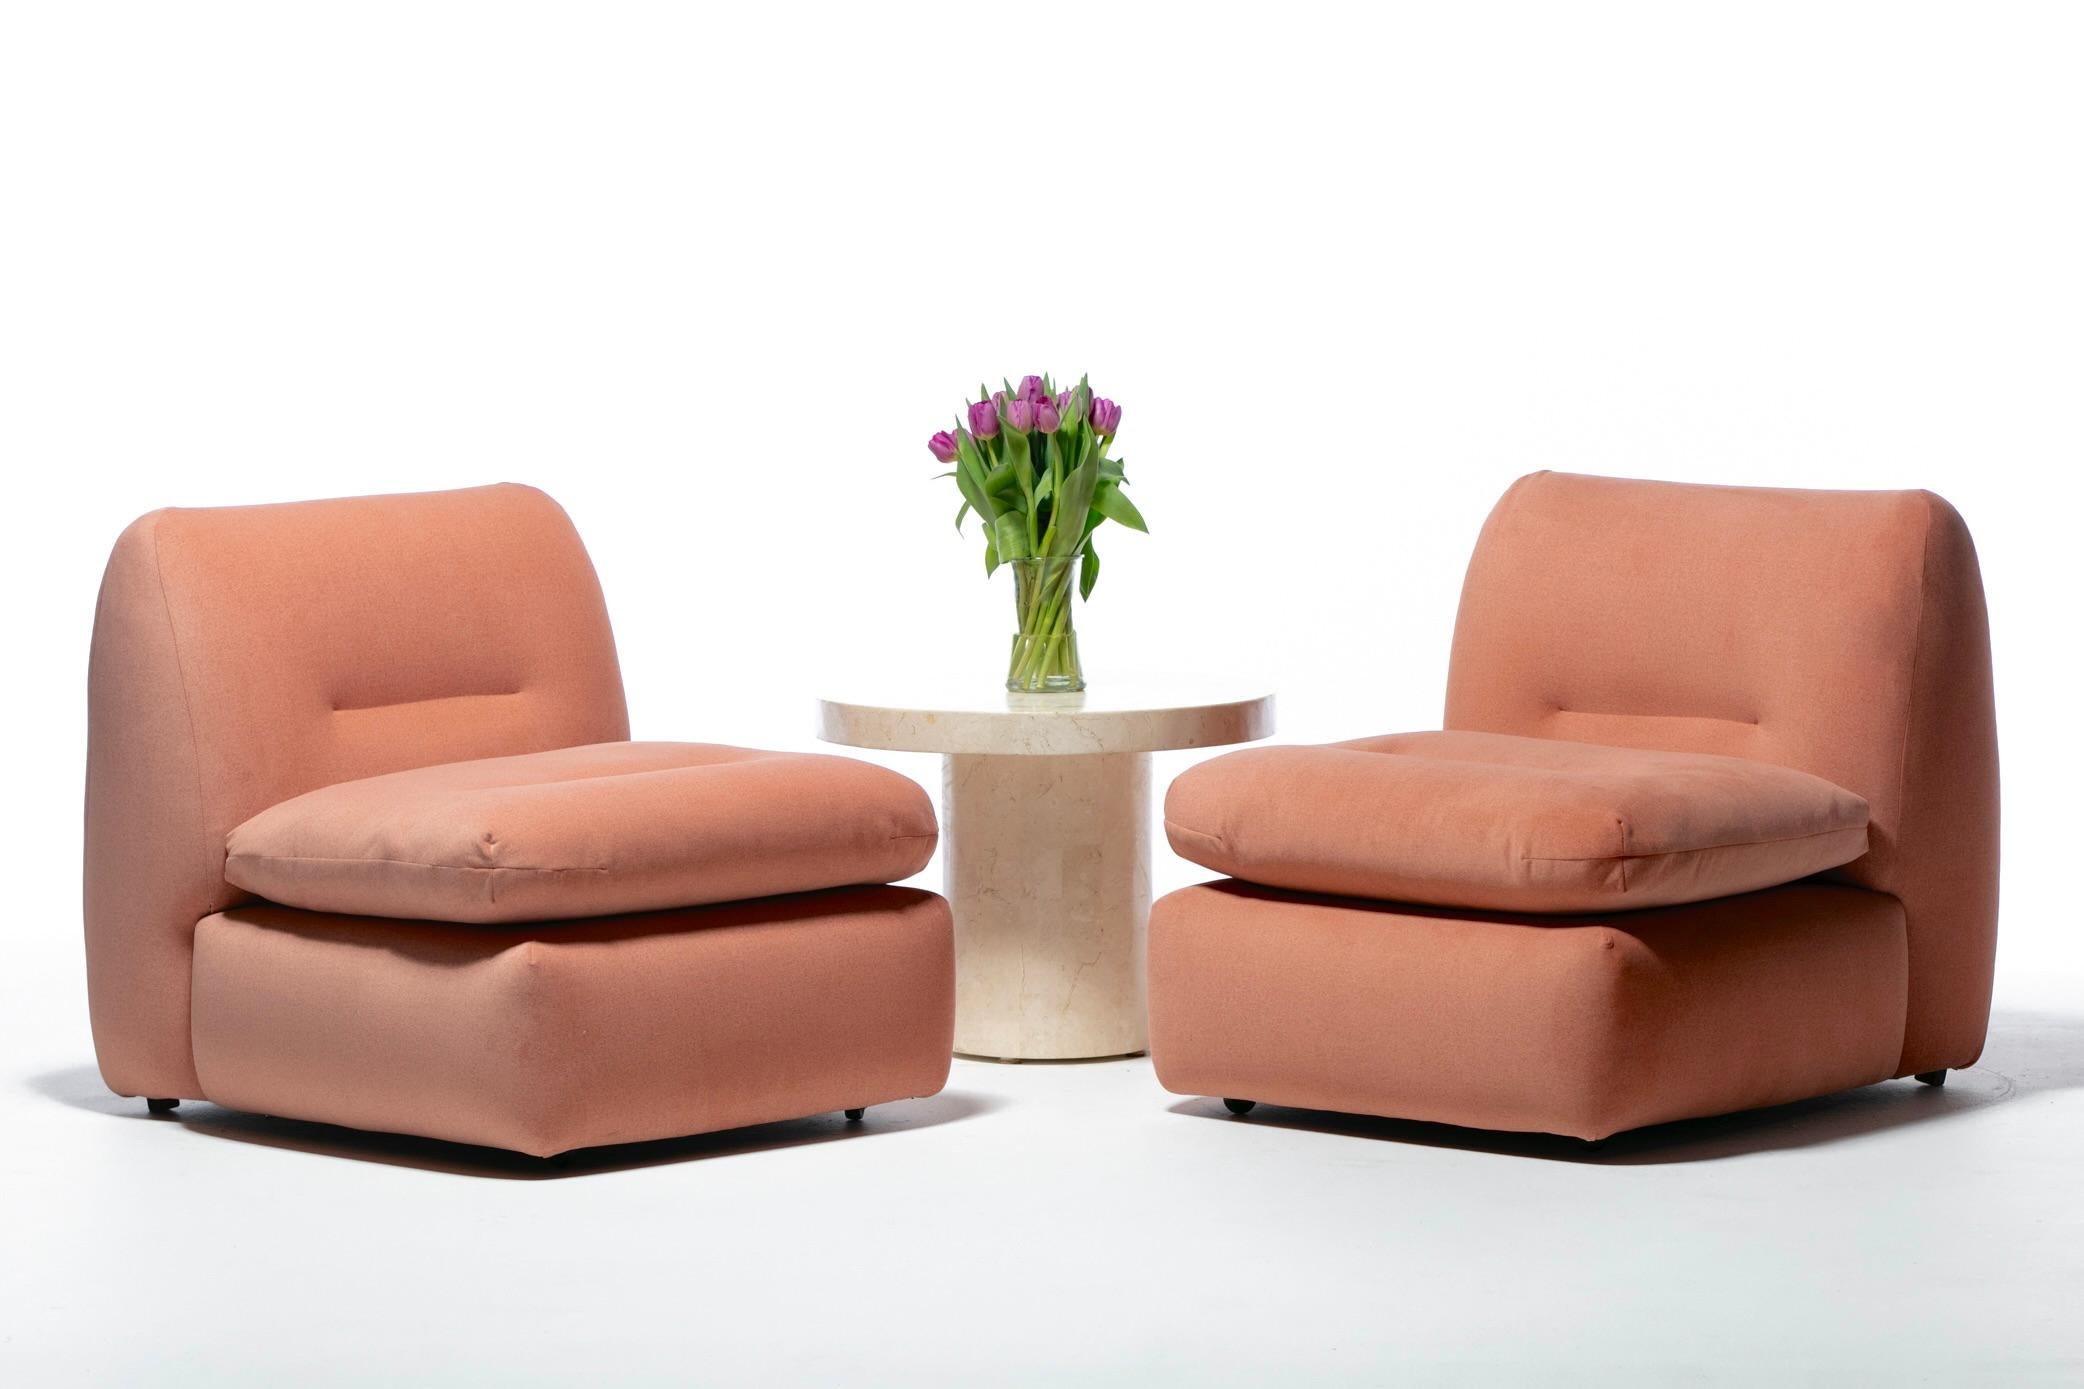 Sexy Italian Slipper Chairs fully restored with new cushioning and Blush Pink upholstery. Modern. Luxurious. Unique form with simple lines and a clean profile. Blush Pink fabric adds warmth with its rich color and cashmere like softness. Plush all